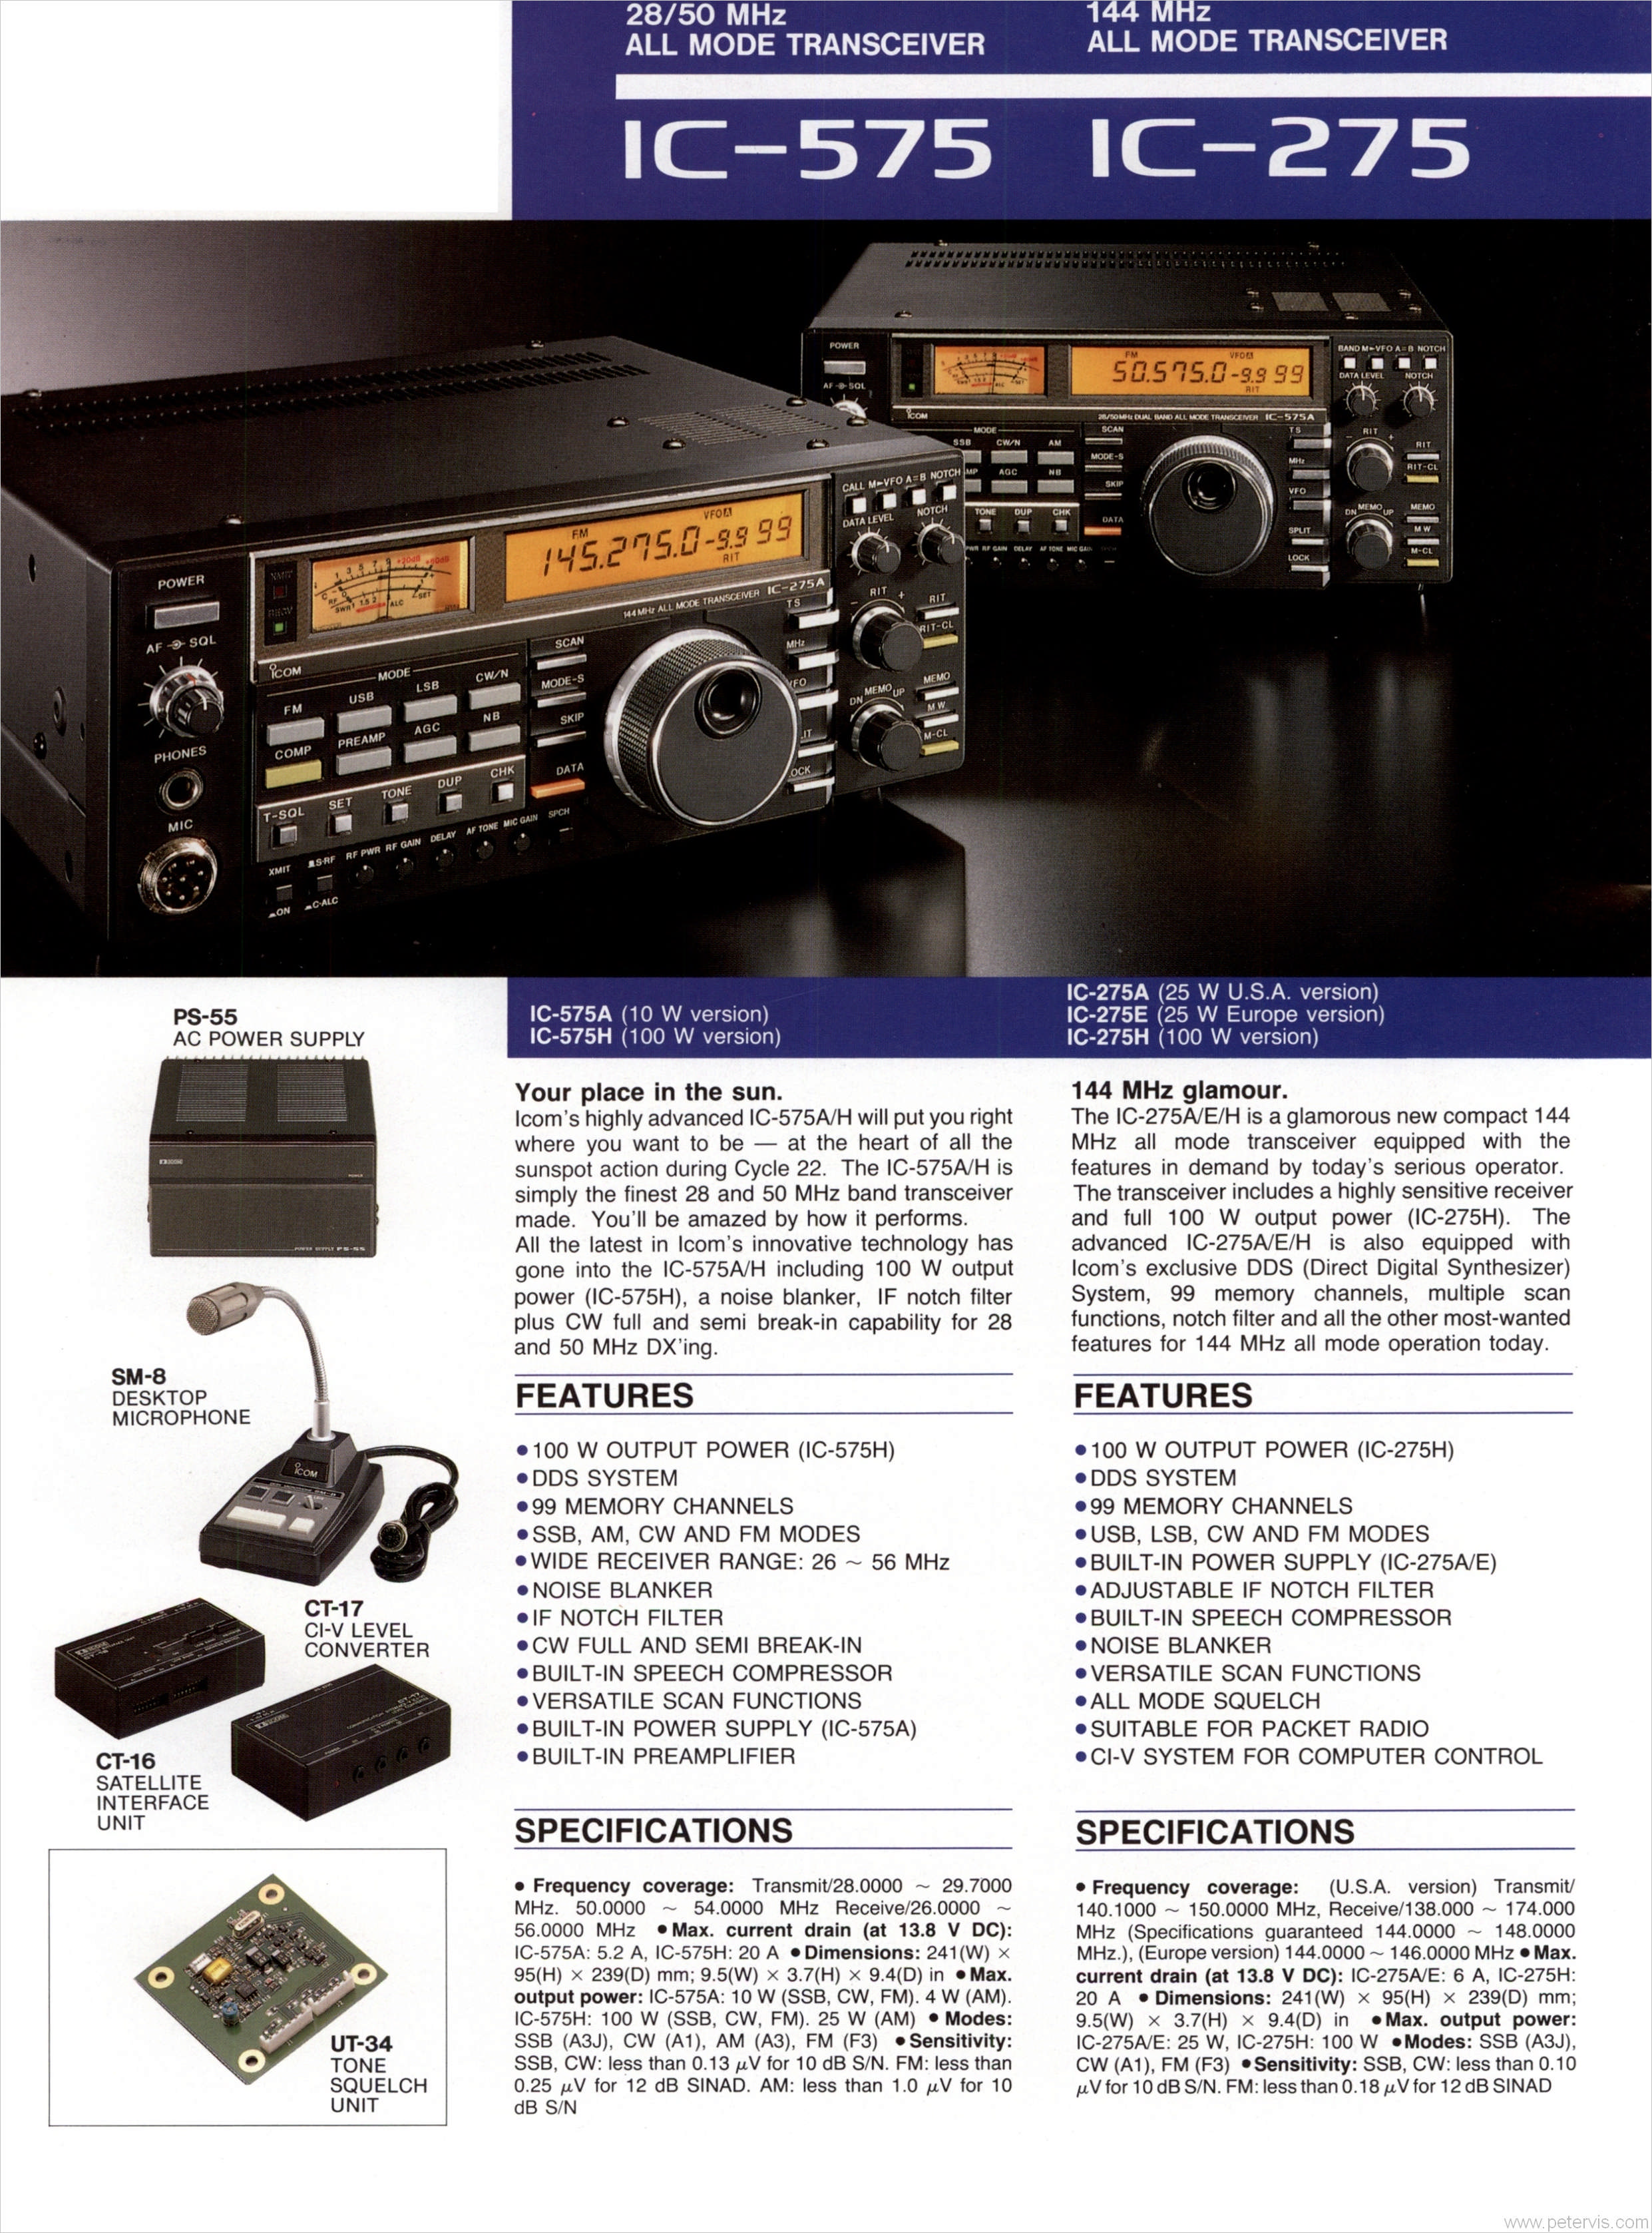 IC-575 and IC-275 SPECIFICATION and FEATURES